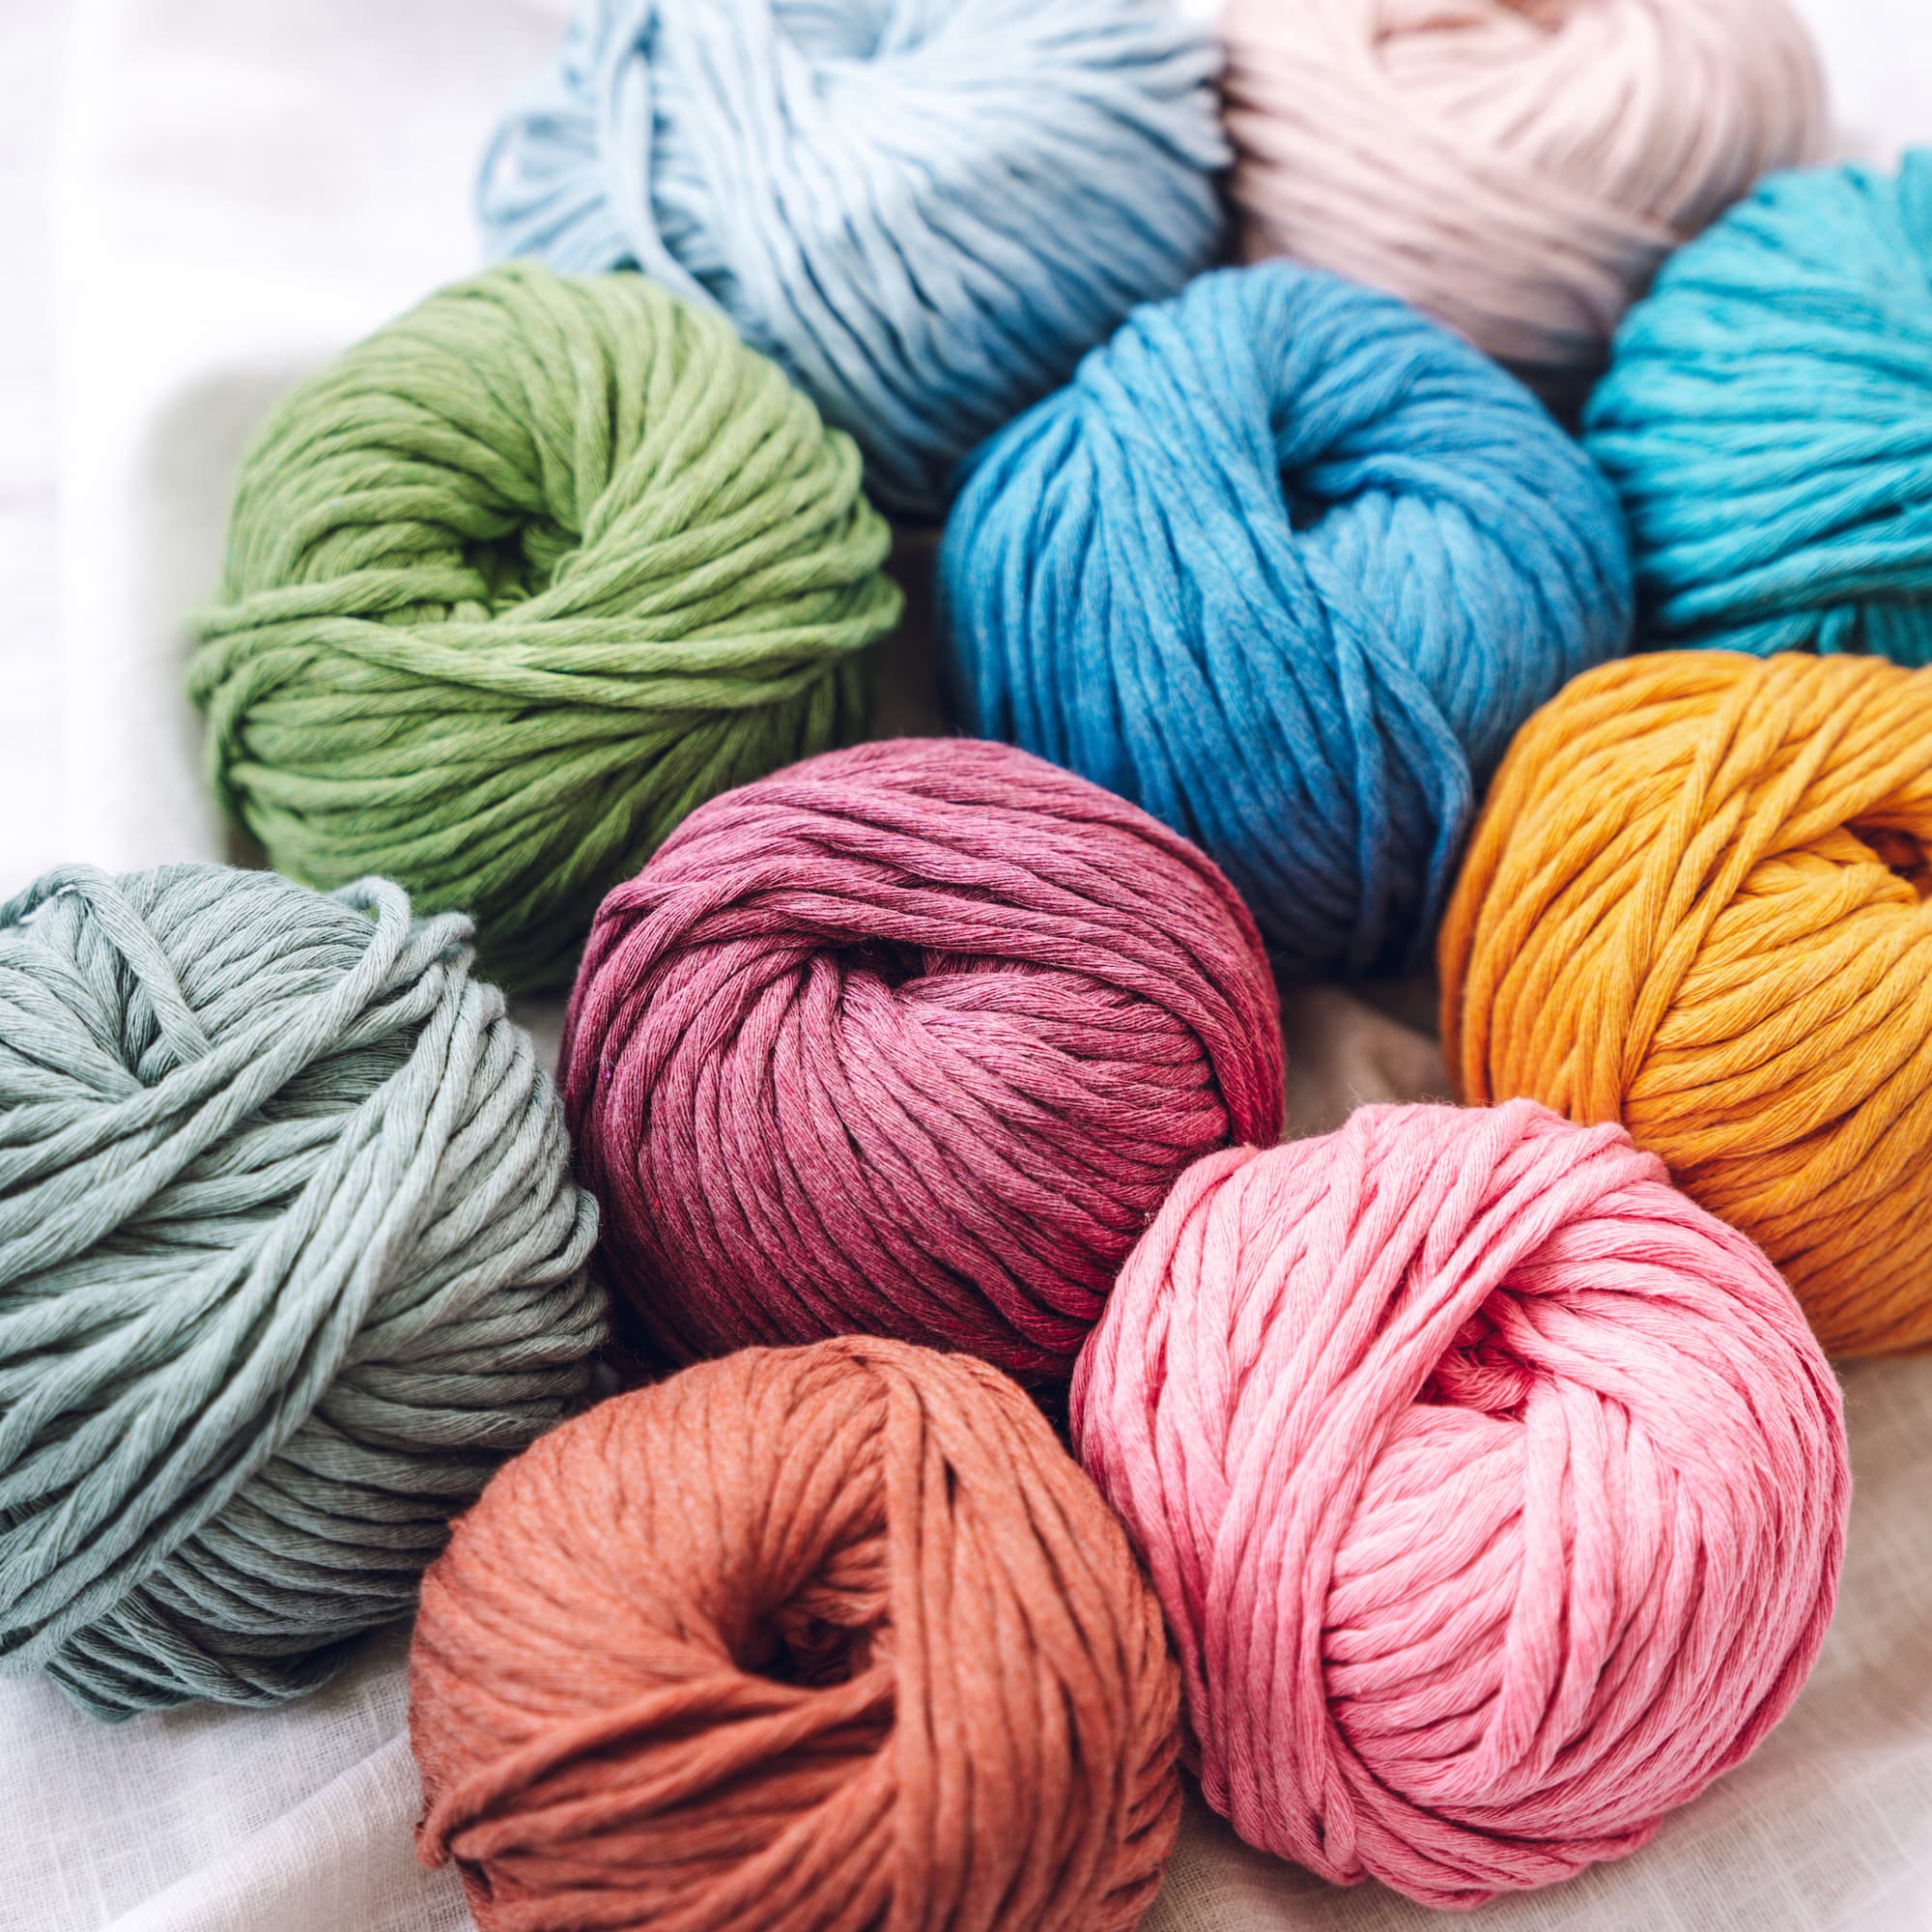 Crochet 101 - 8 Budget Yarn Brands You Should Know! — The Weaving